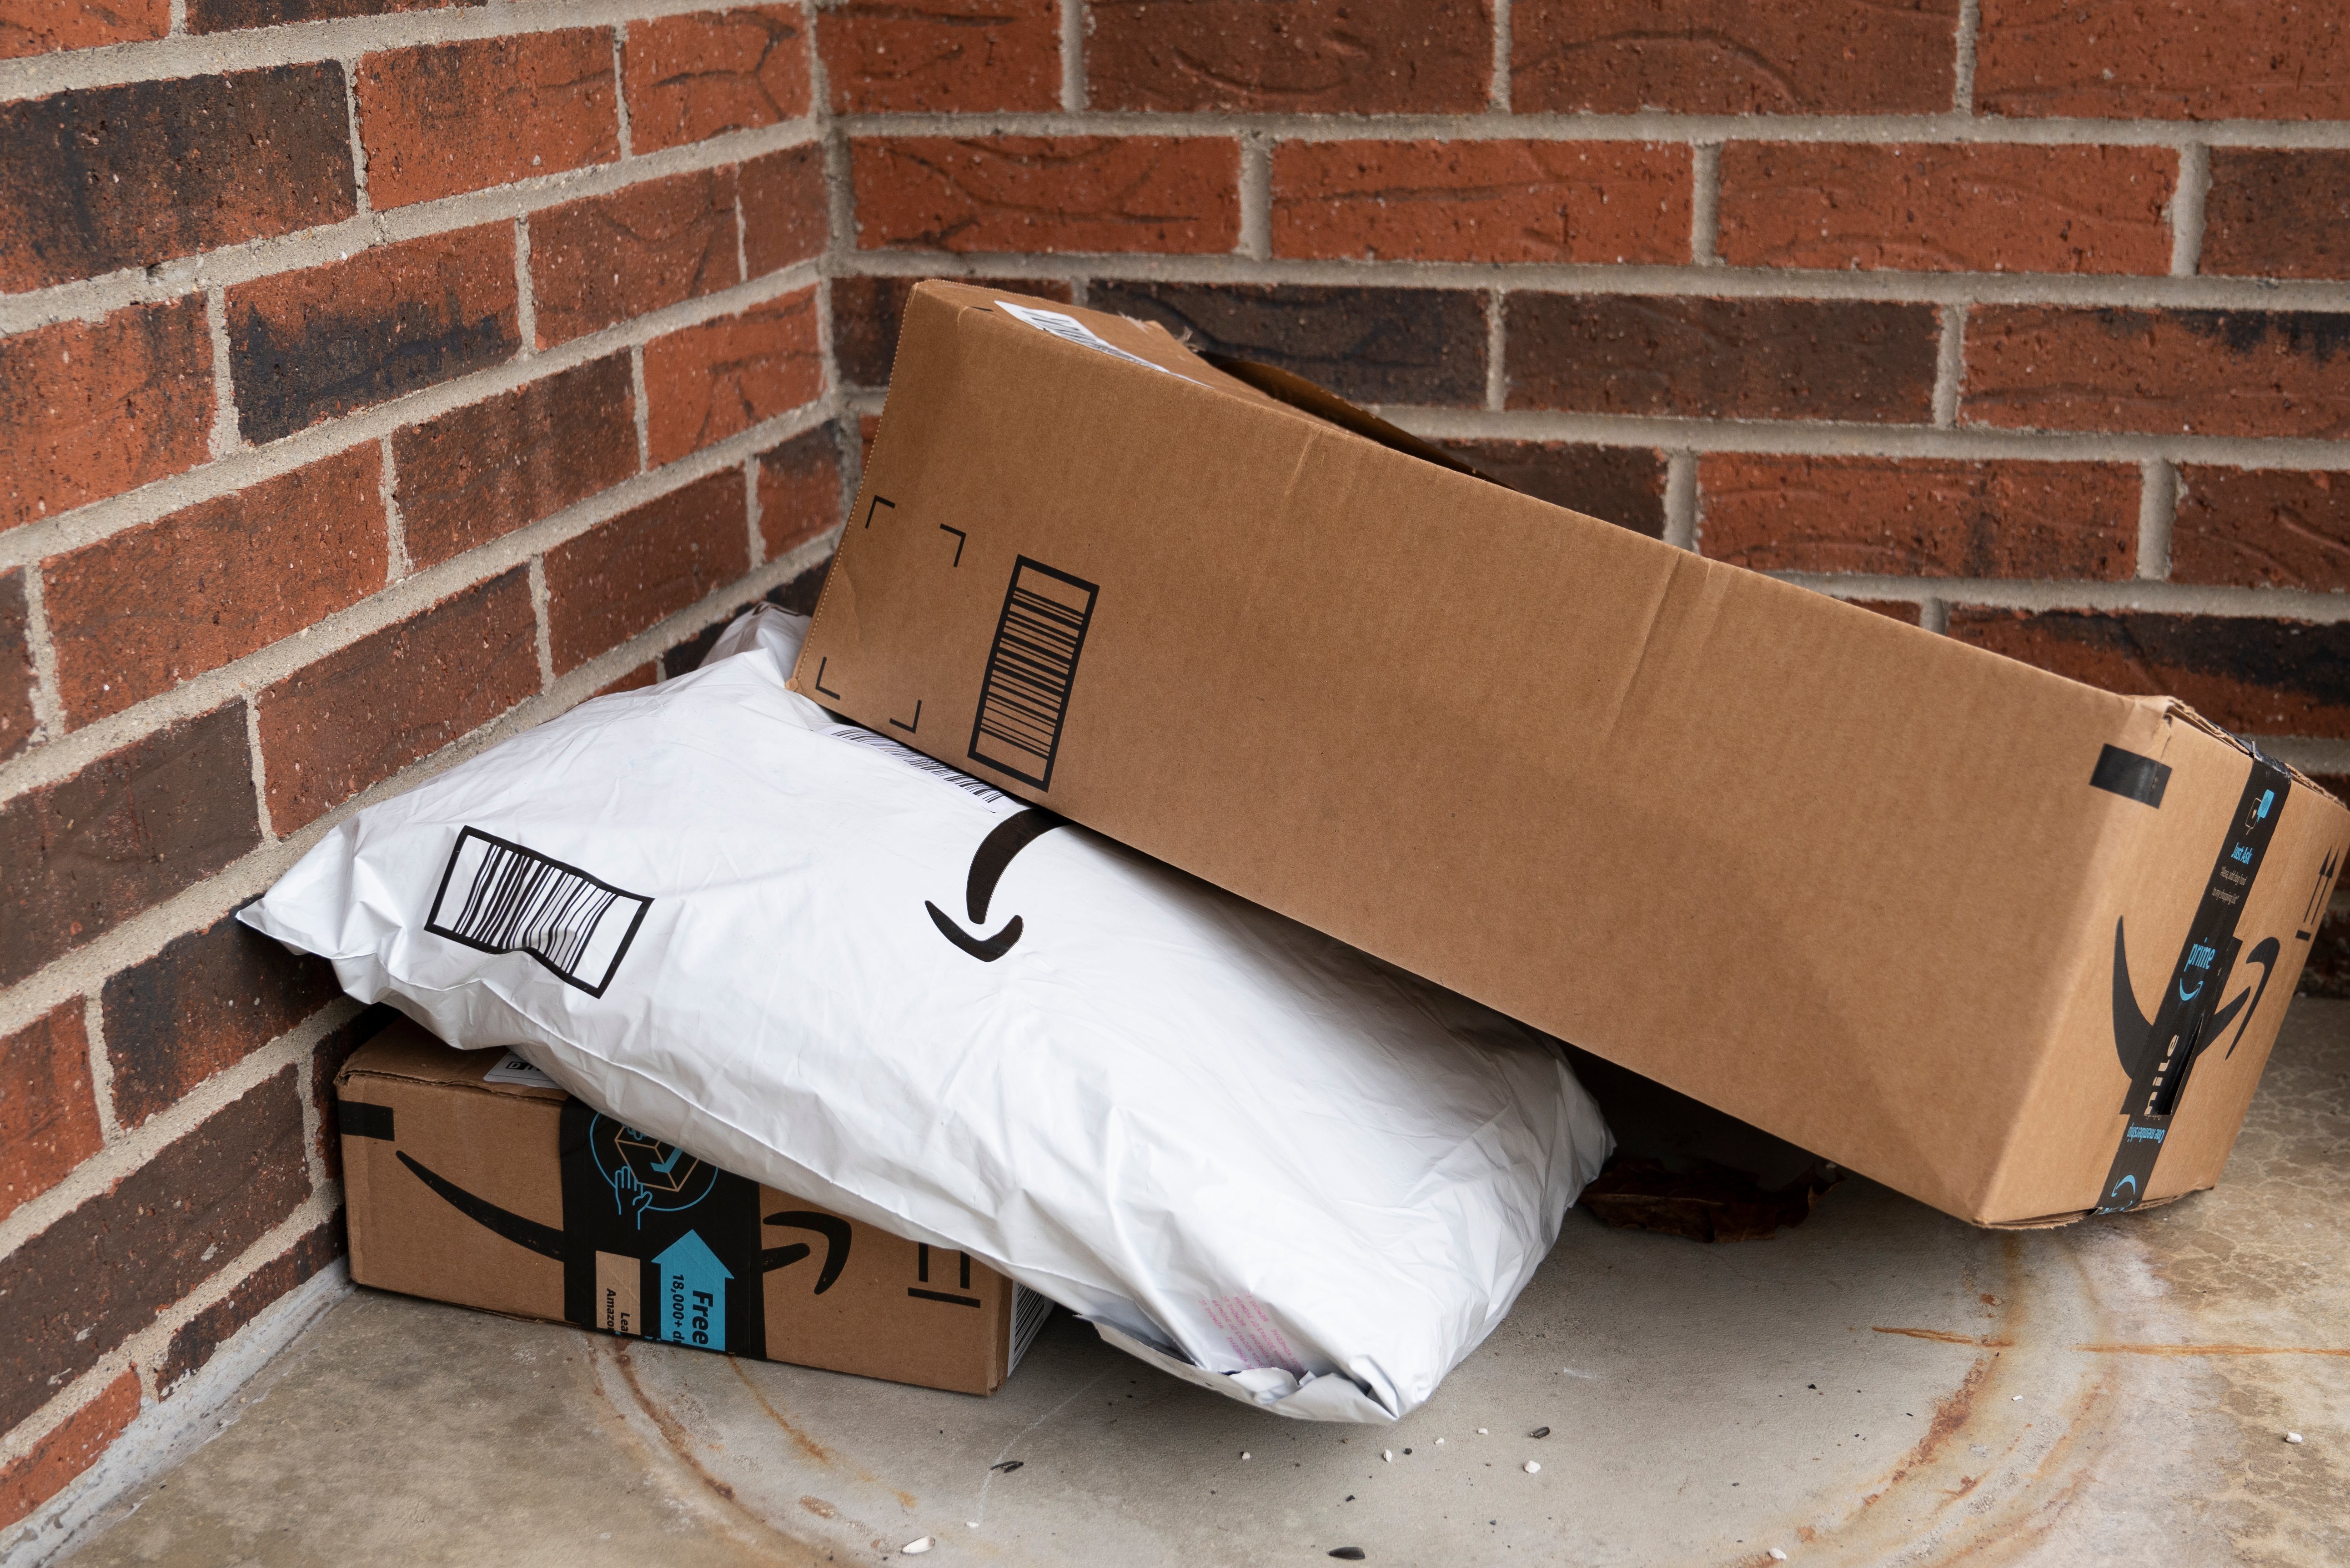 retail market research amazon left packages